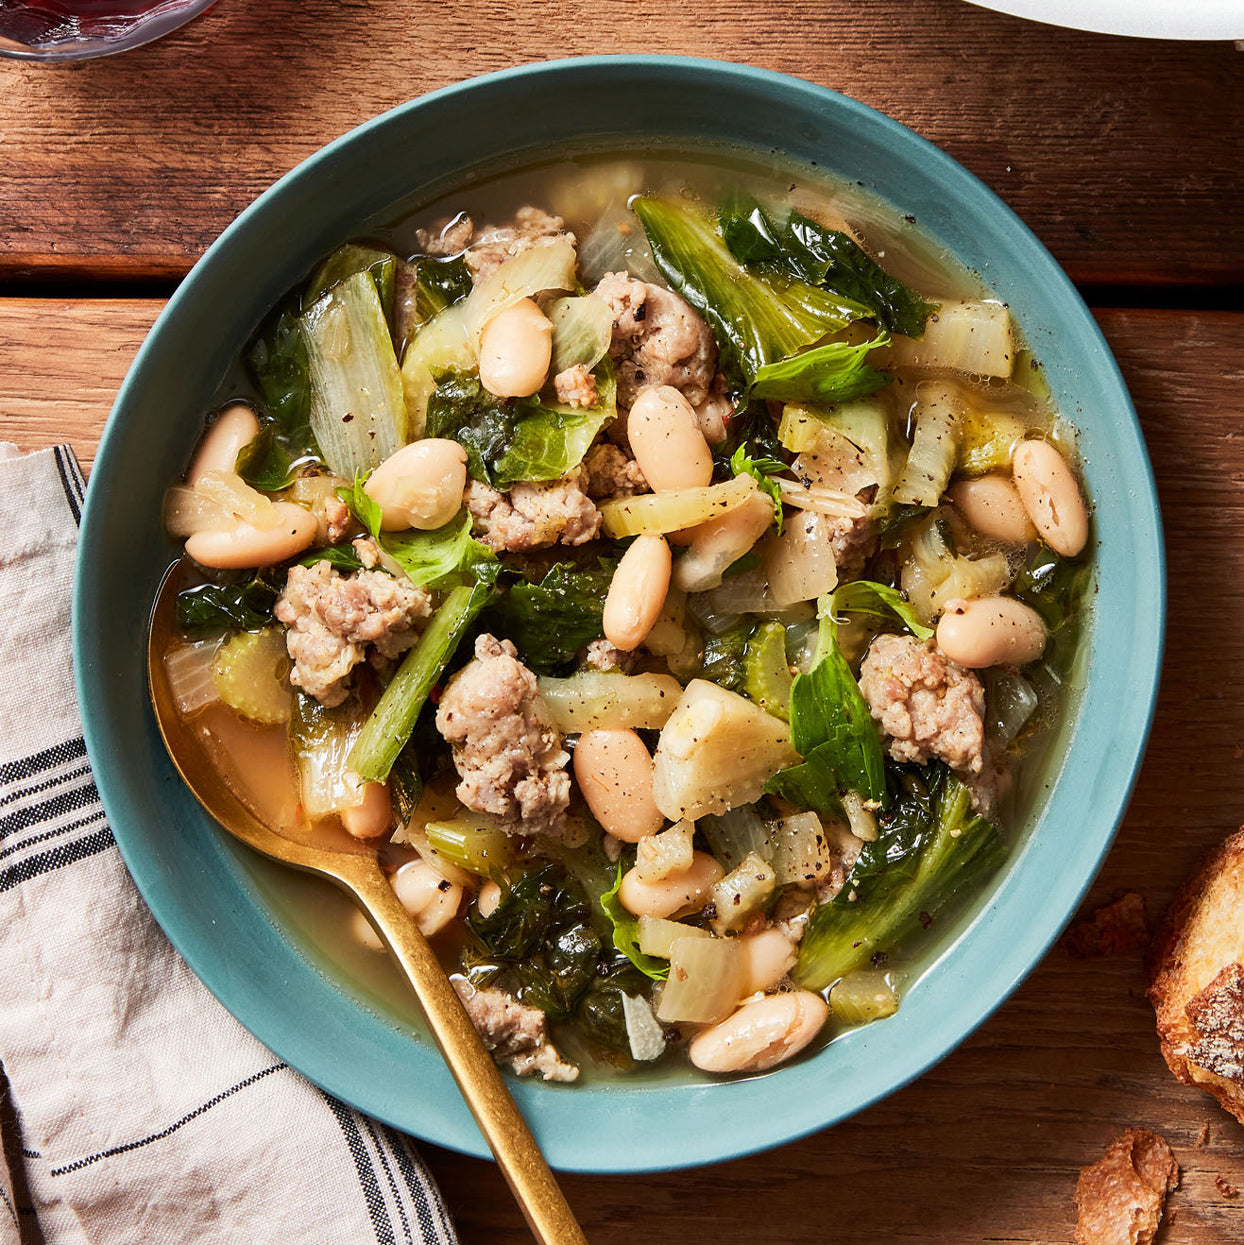 Sausage, Fennel & Greens with White Beans